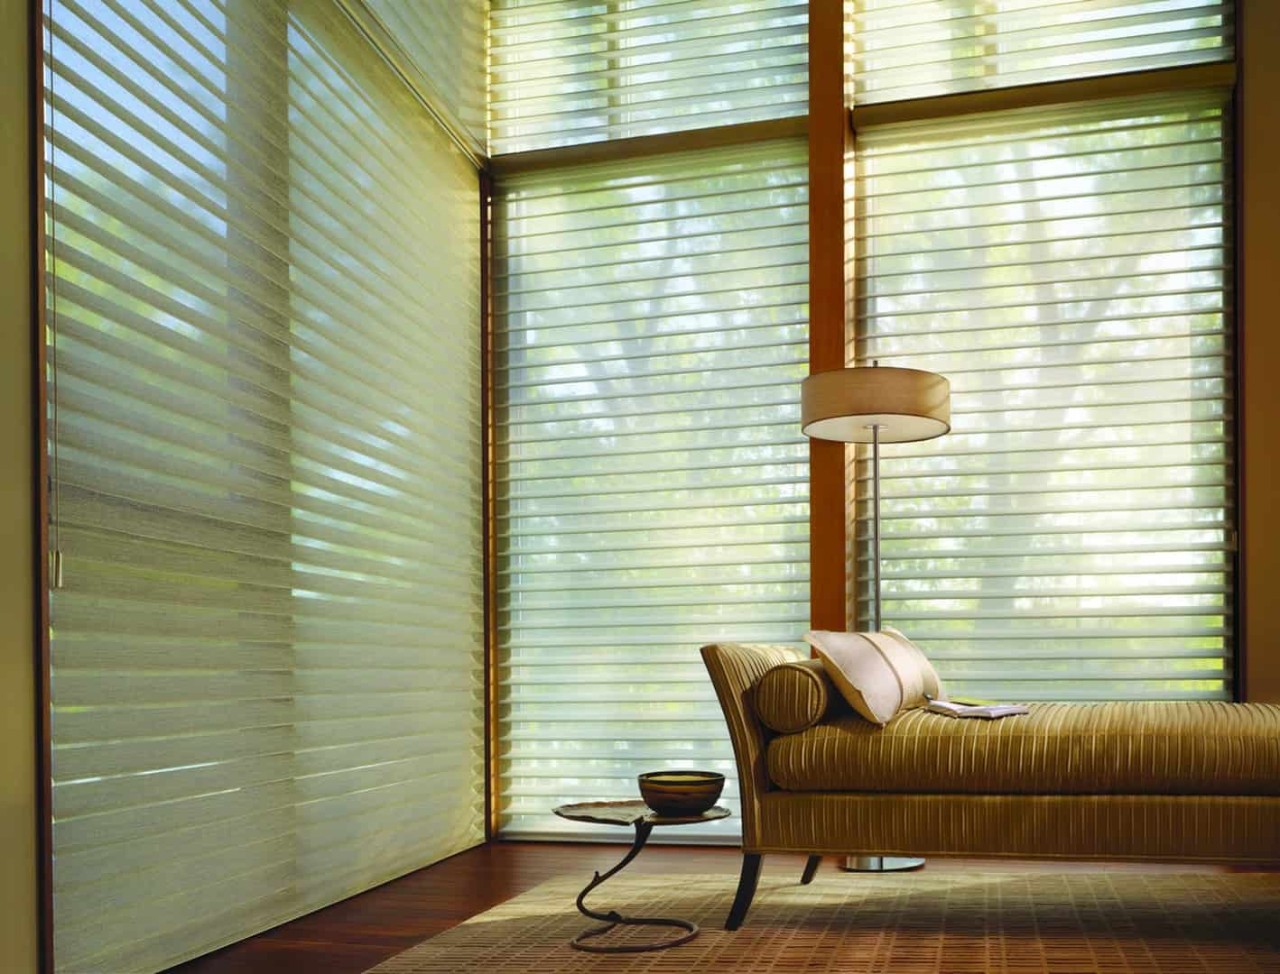 Bringing Light into Your Home near Flower Mound, Texas (TX) including Sheers and Shutters